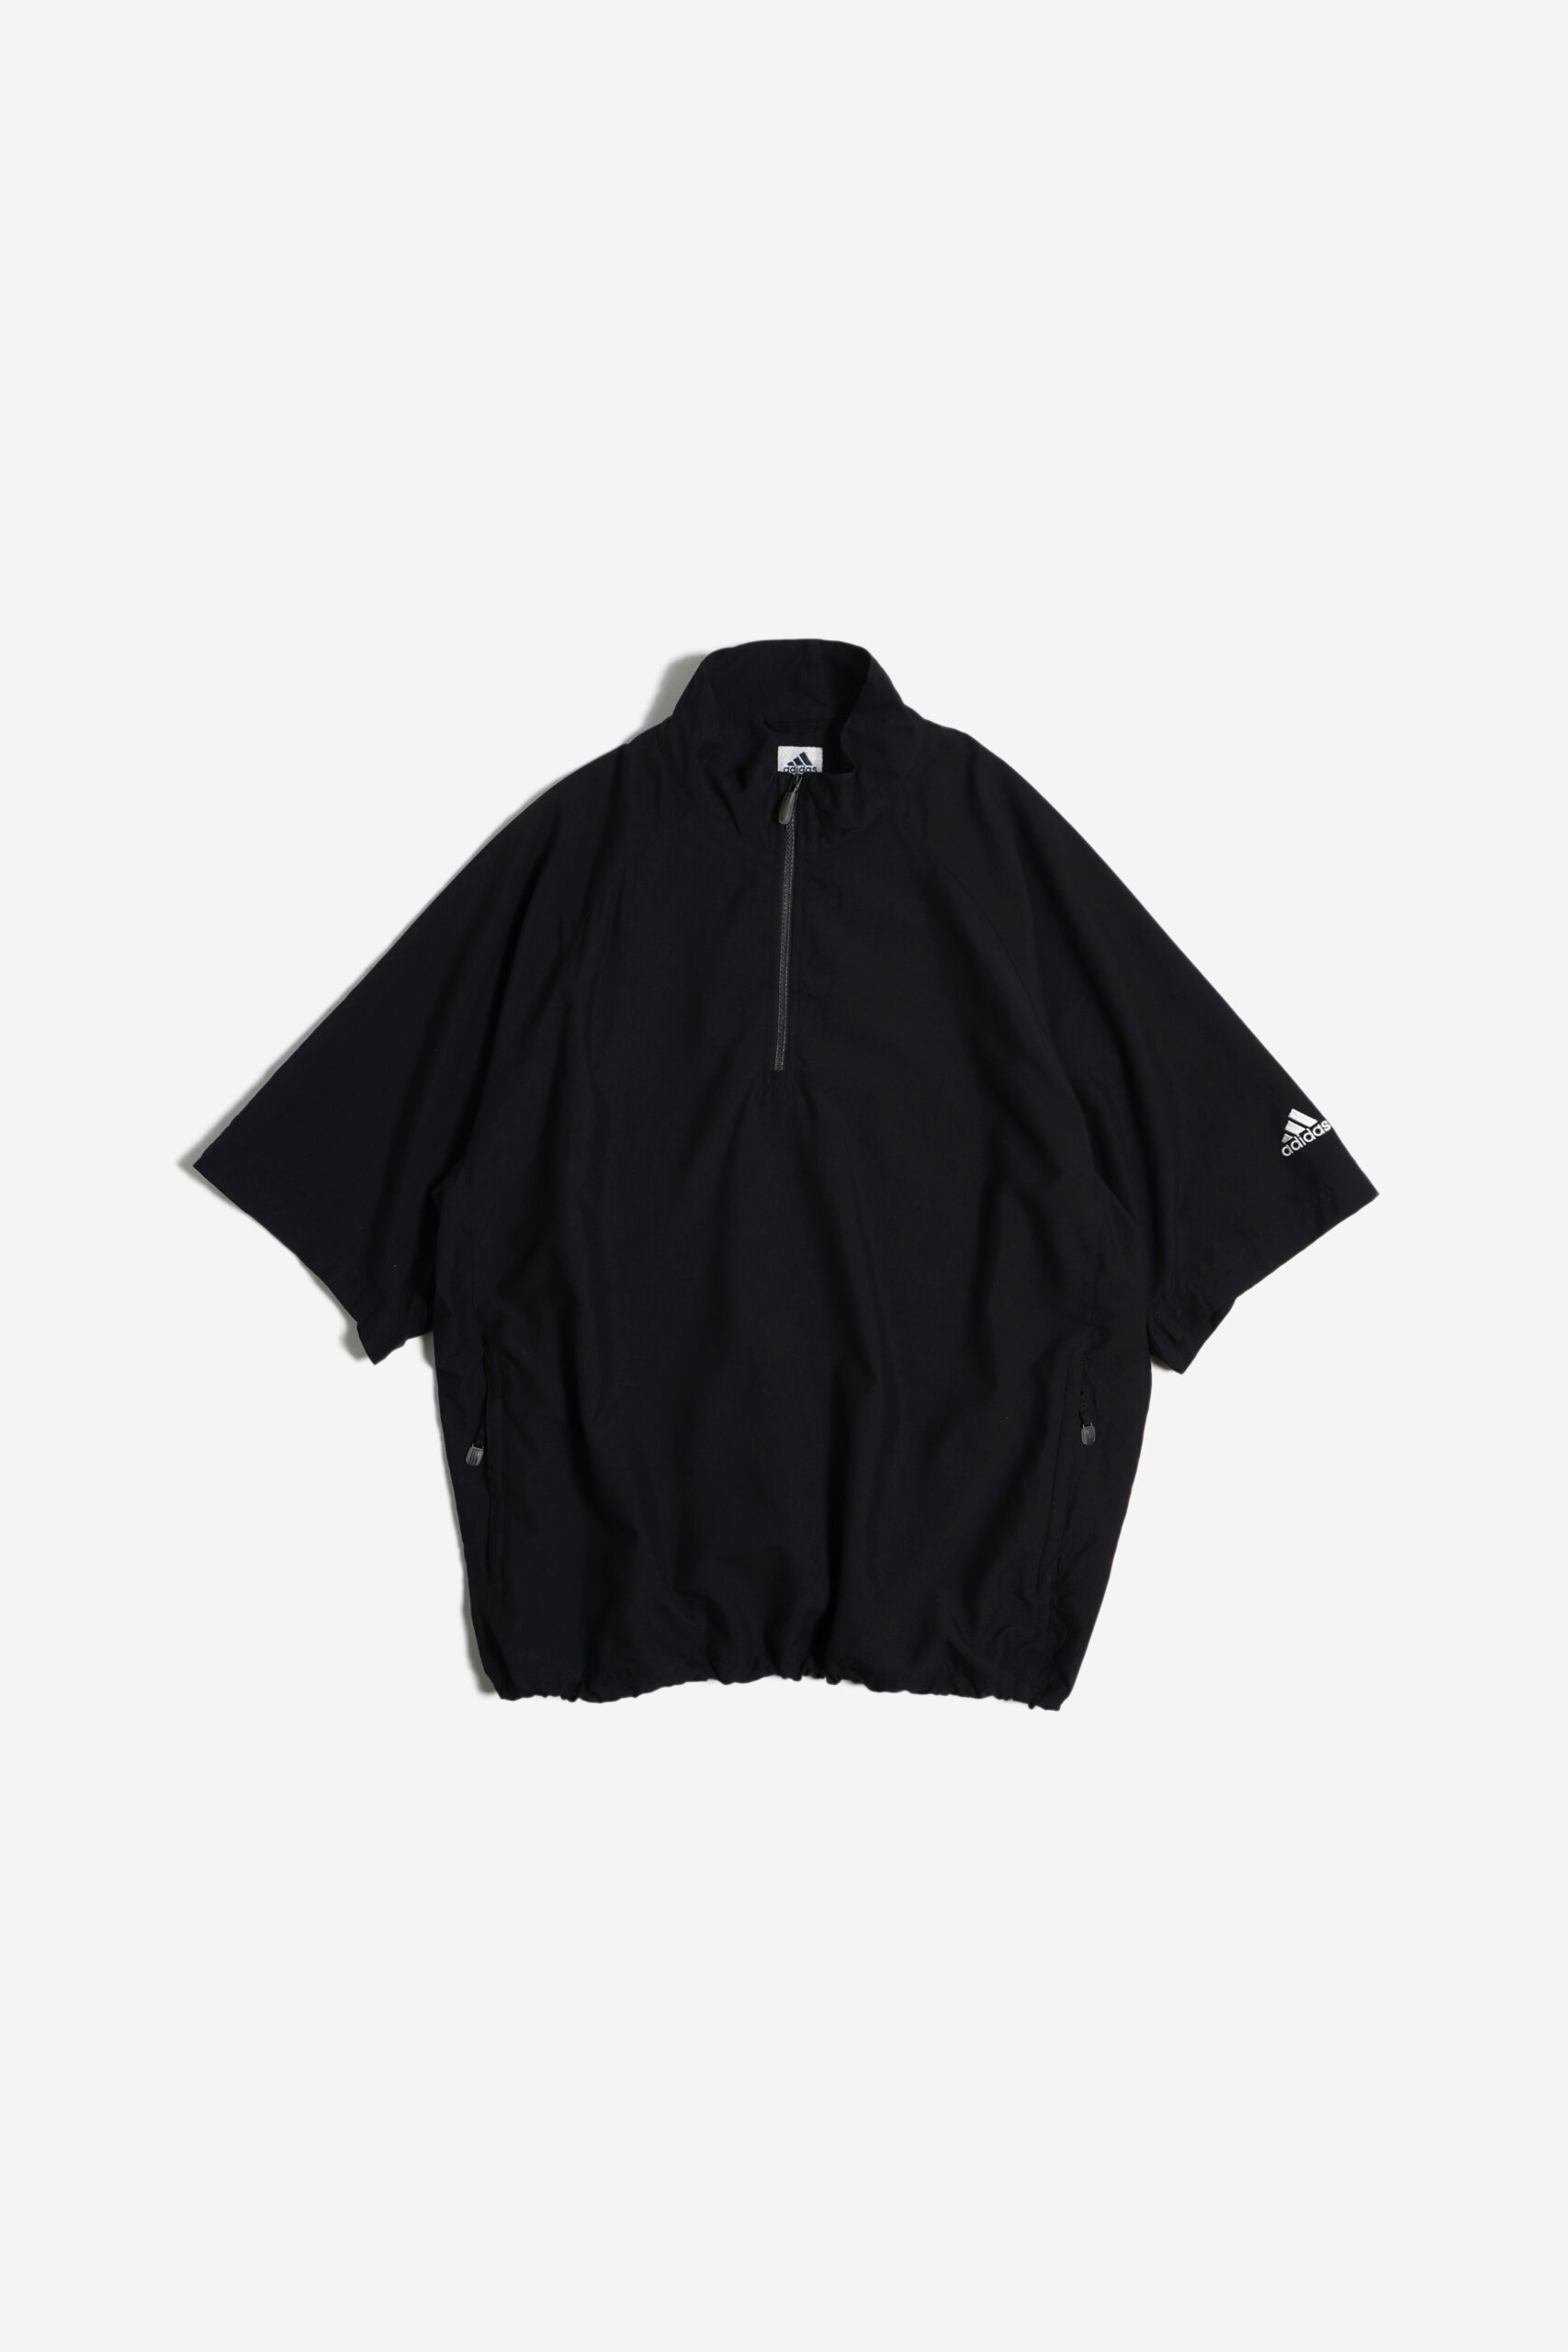 ADIDAS CLIMA COOL HALF ZIP S/S PULLOVER